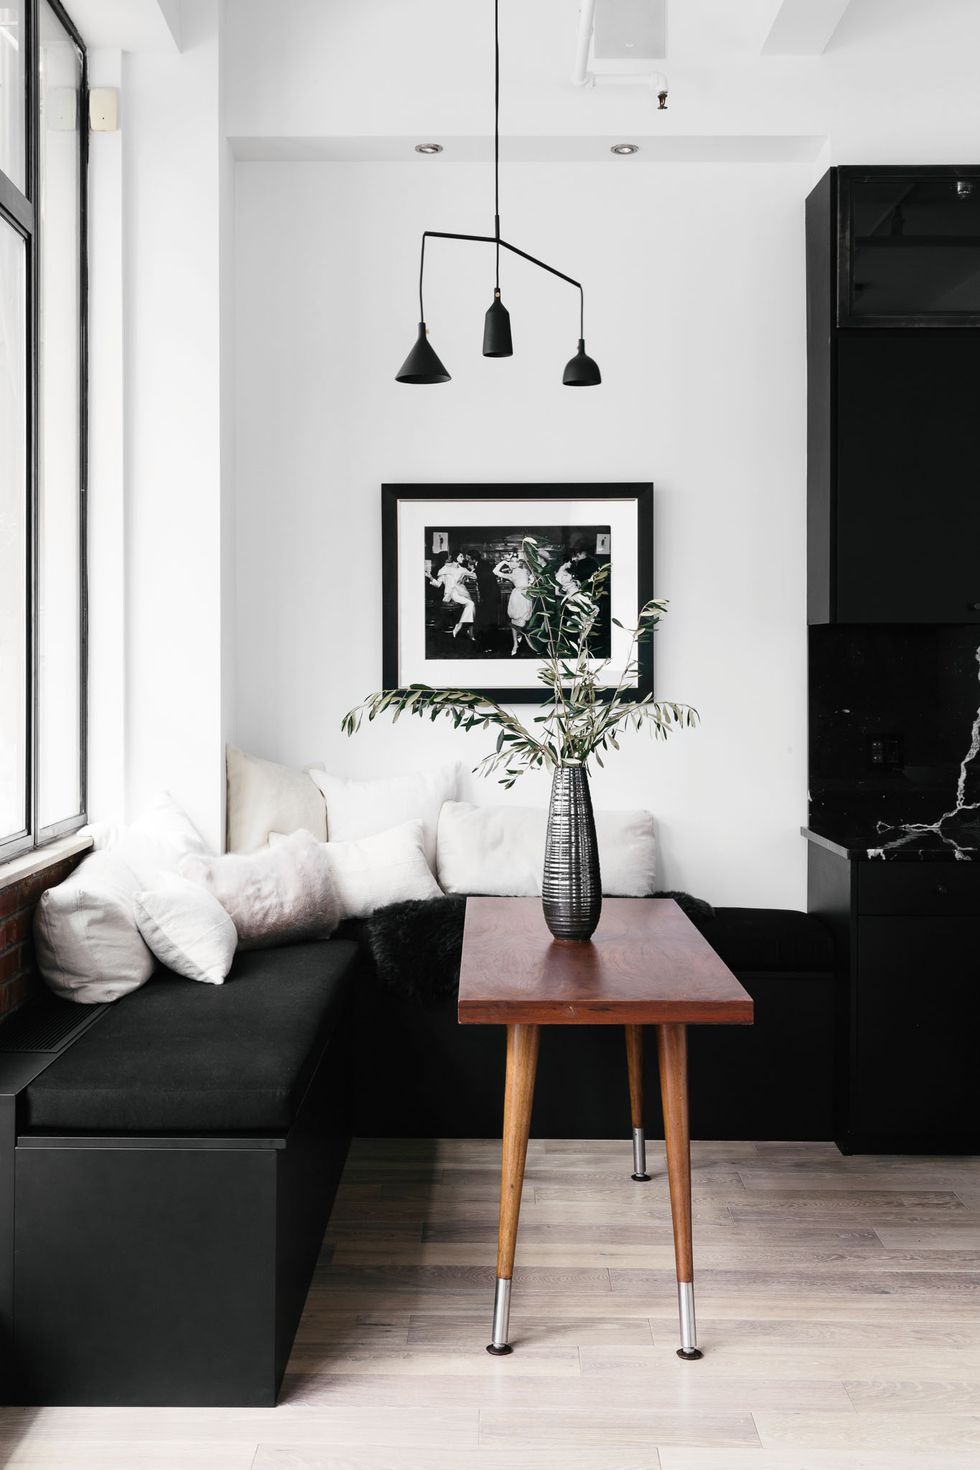 How To Use Black White Decor And Walls, White And Black Living Room